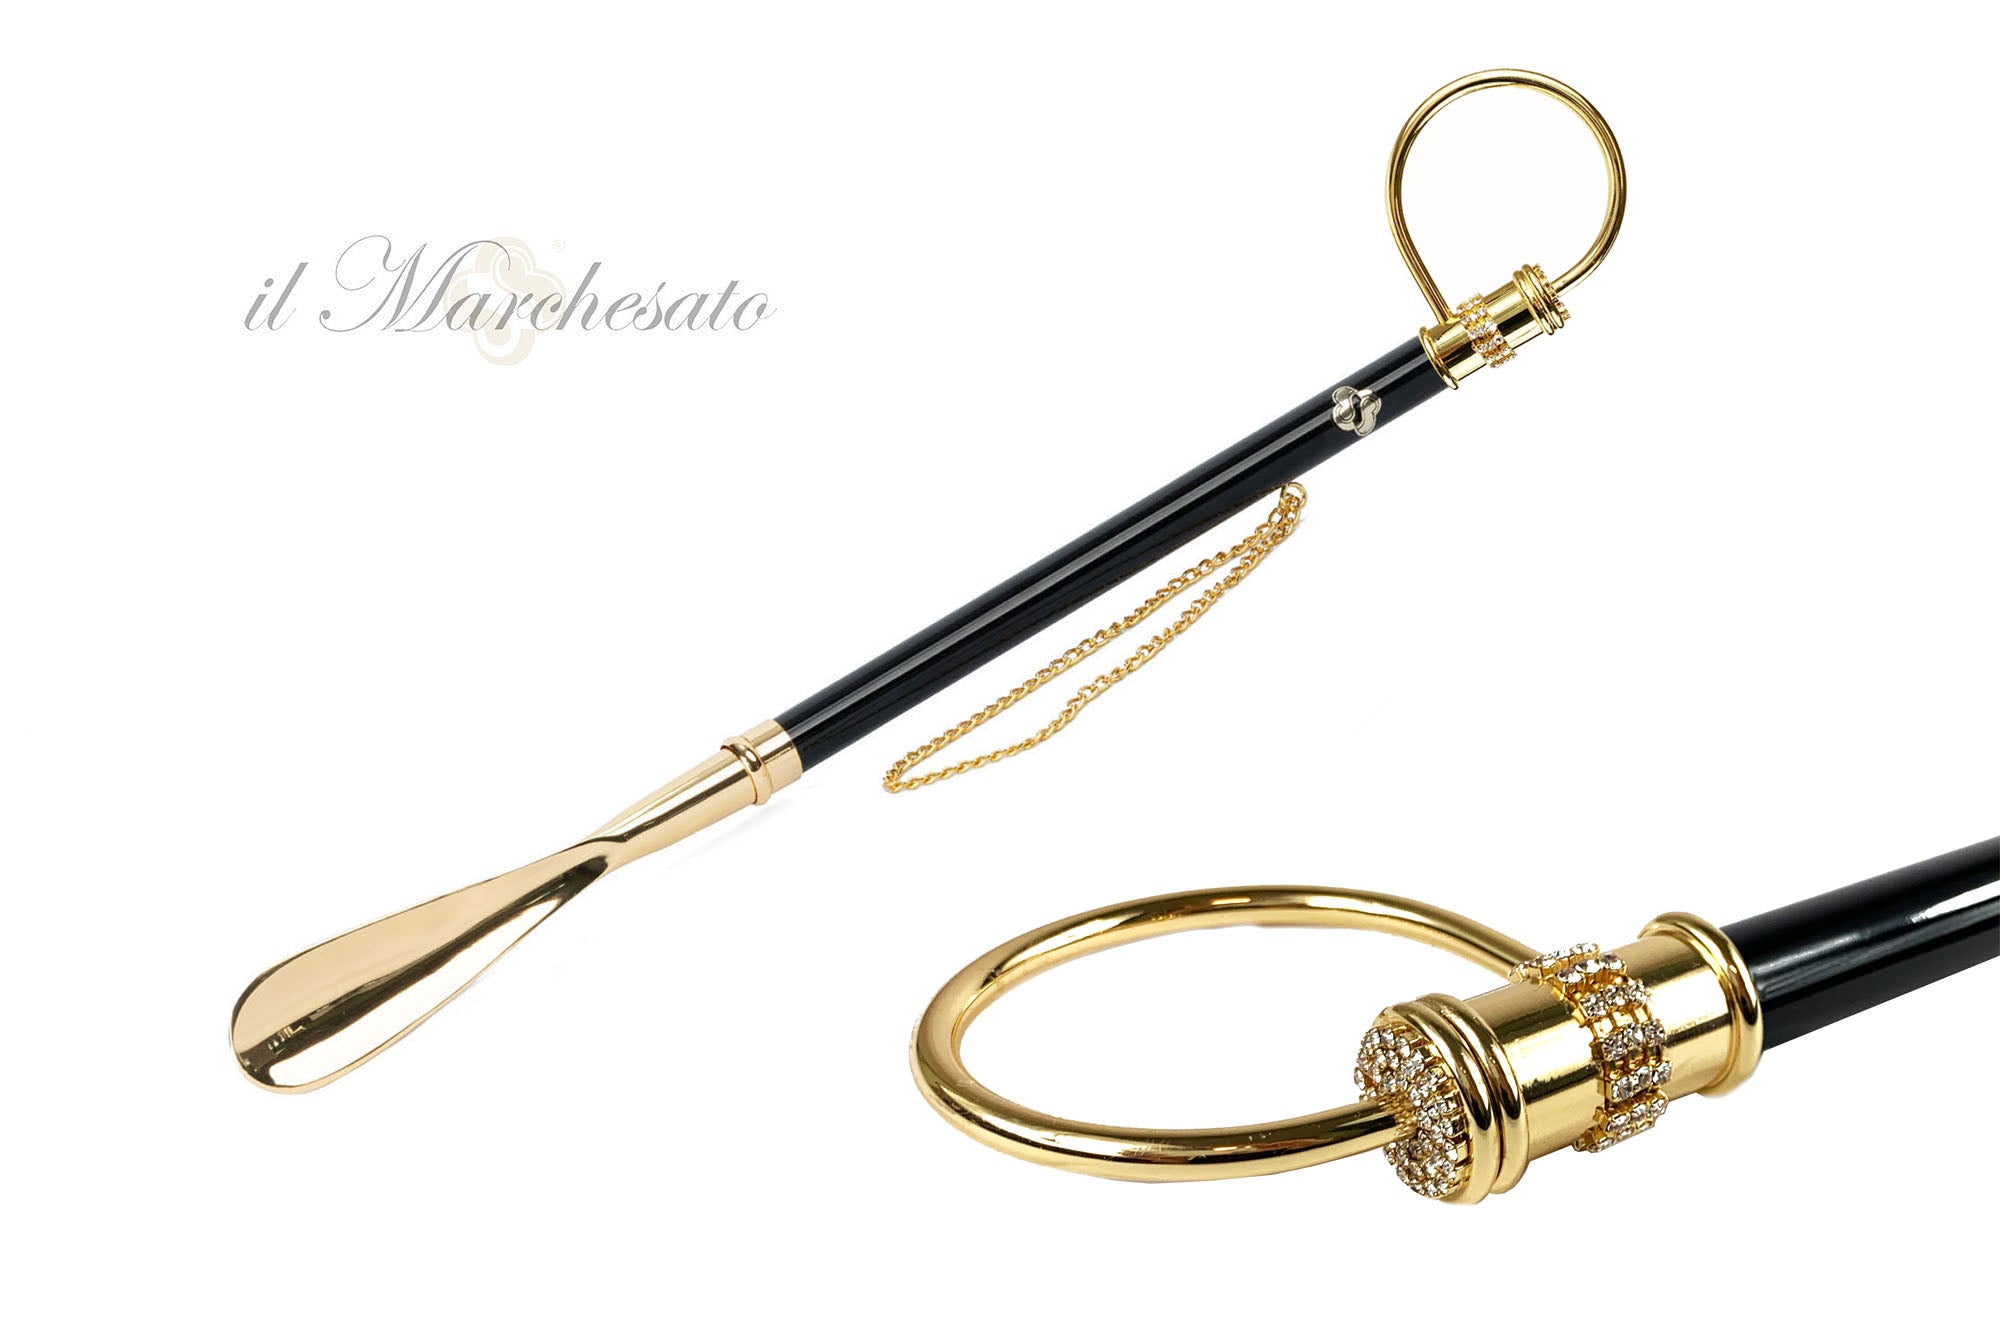 Artisanal Italian Shoehorn: Luxury Crystals at Your Service